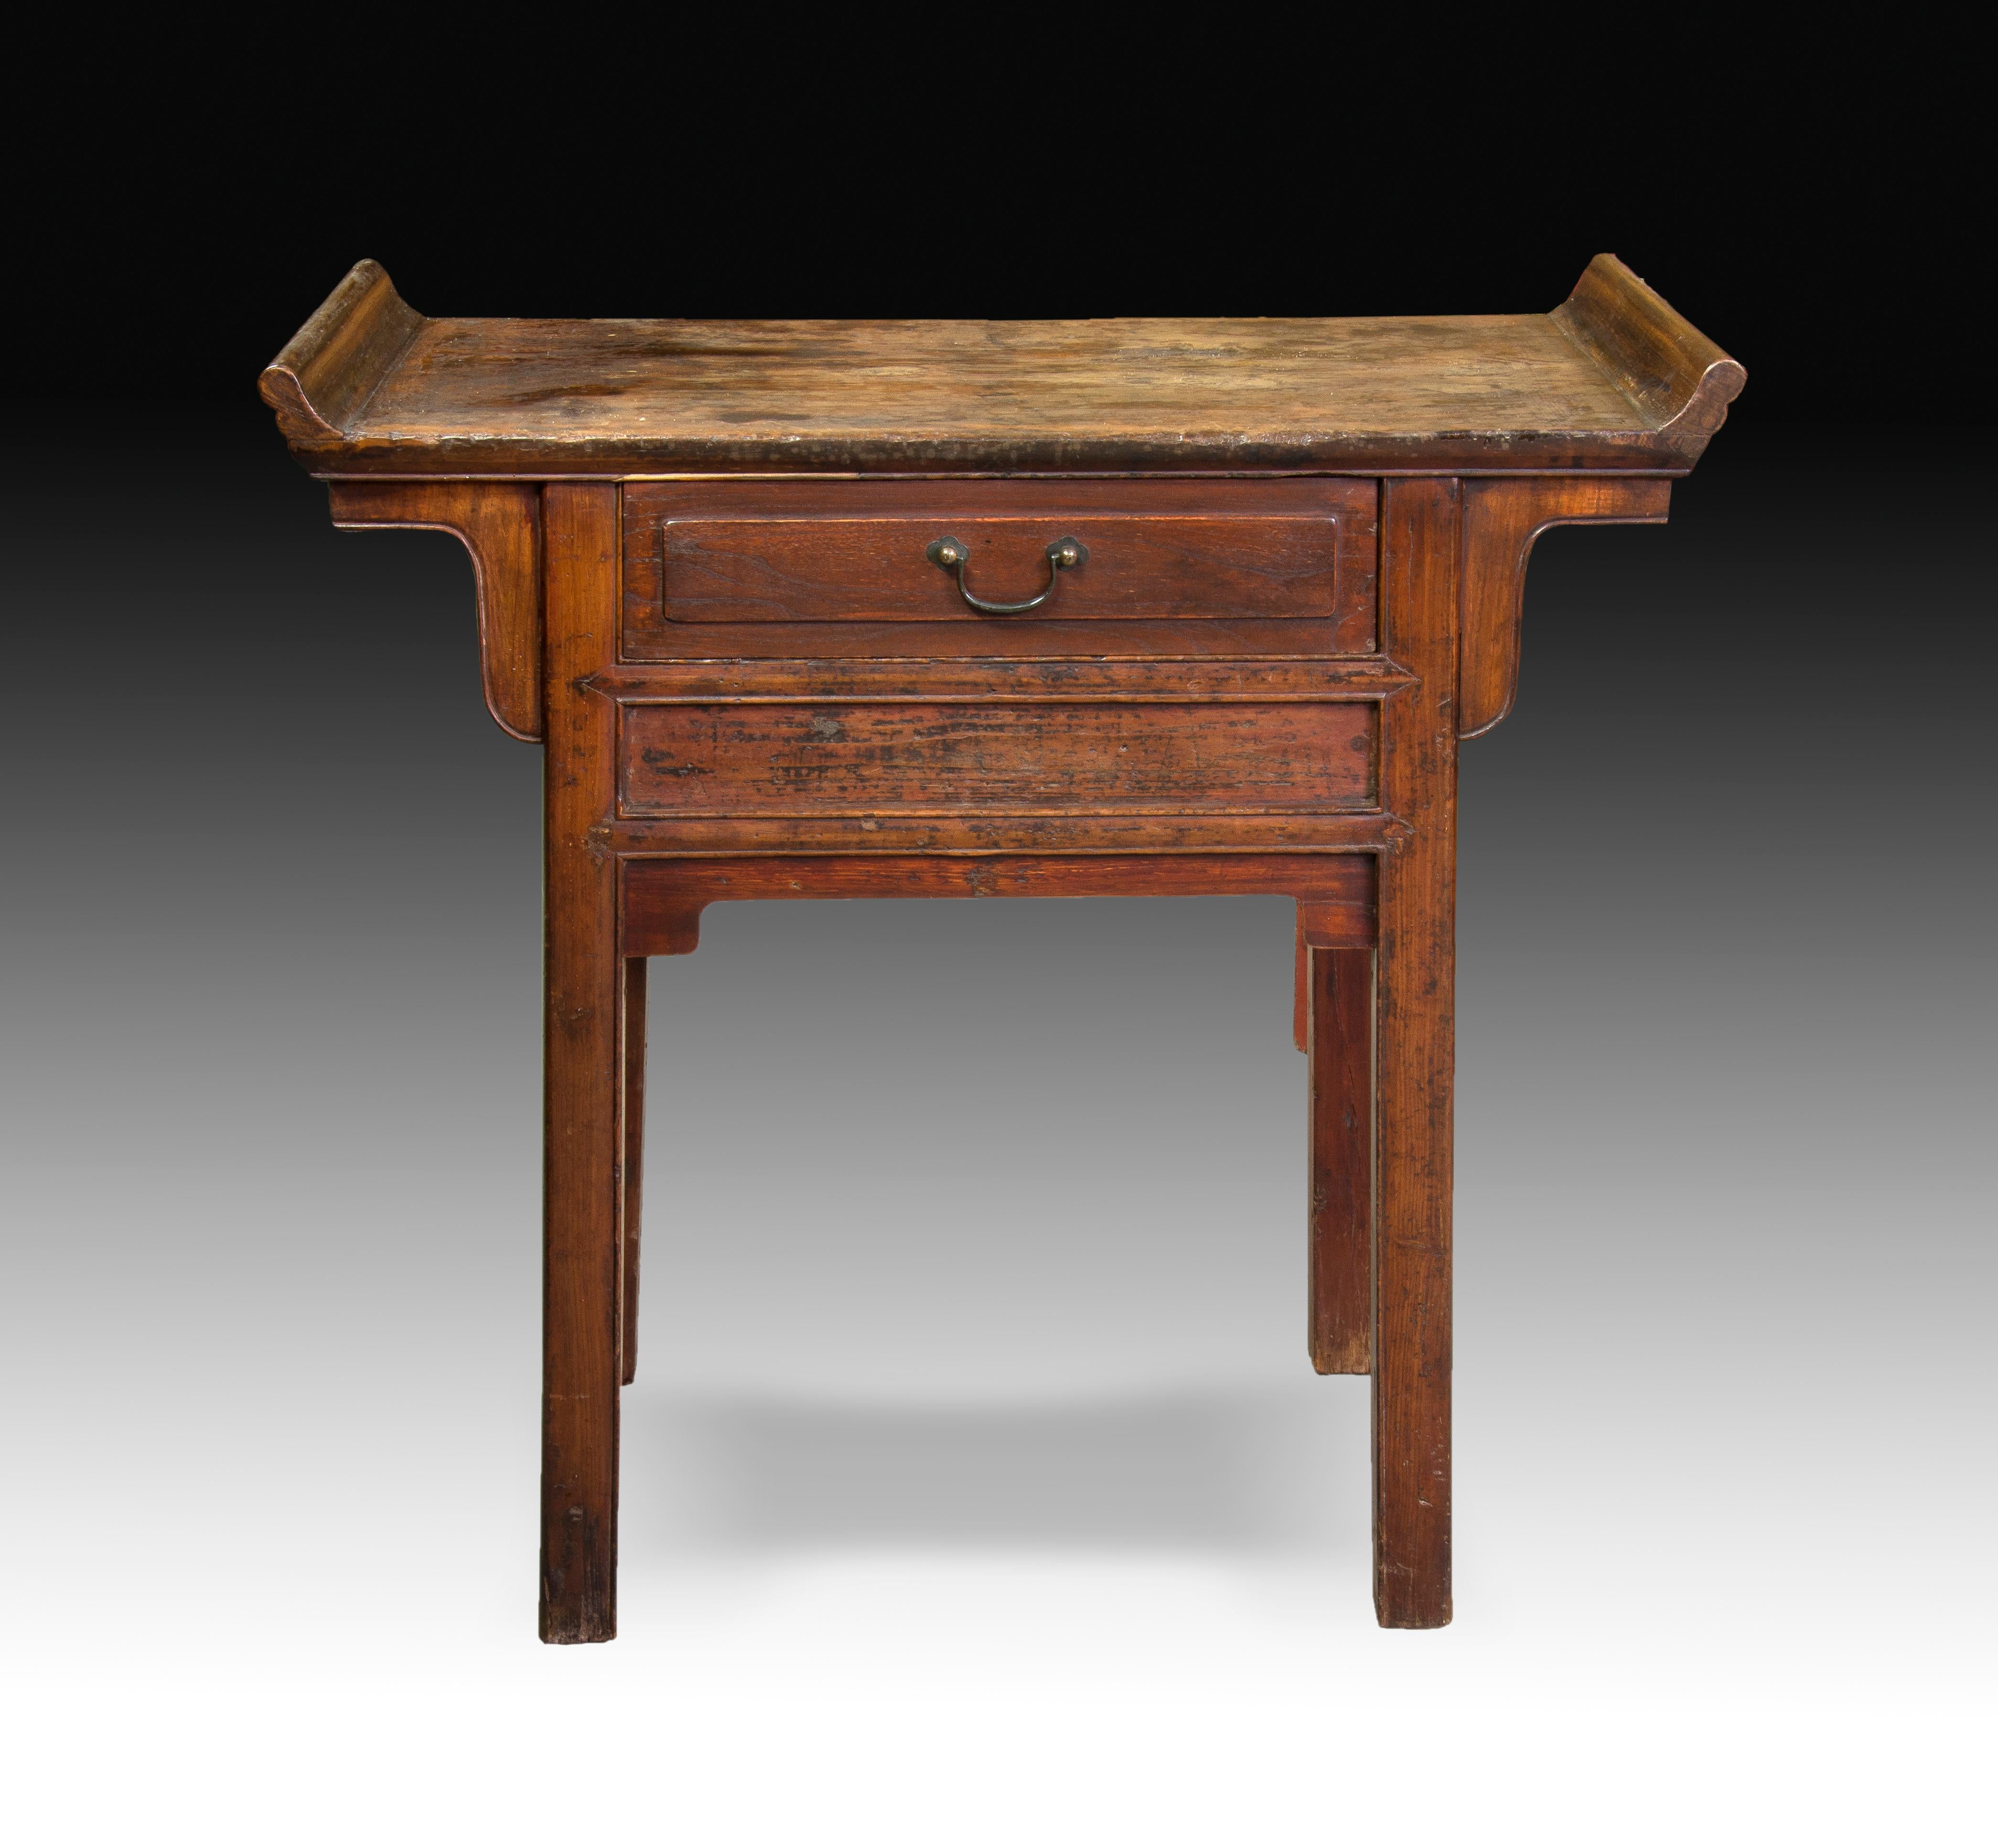 Oriental table. Carved wood, metal. Twentieth century. 
Side table made of carved wood, with a rectangular top board decorated with two highlights on its smaller sides and a drawer in front. Both its shape and its decoration (simple, present on the